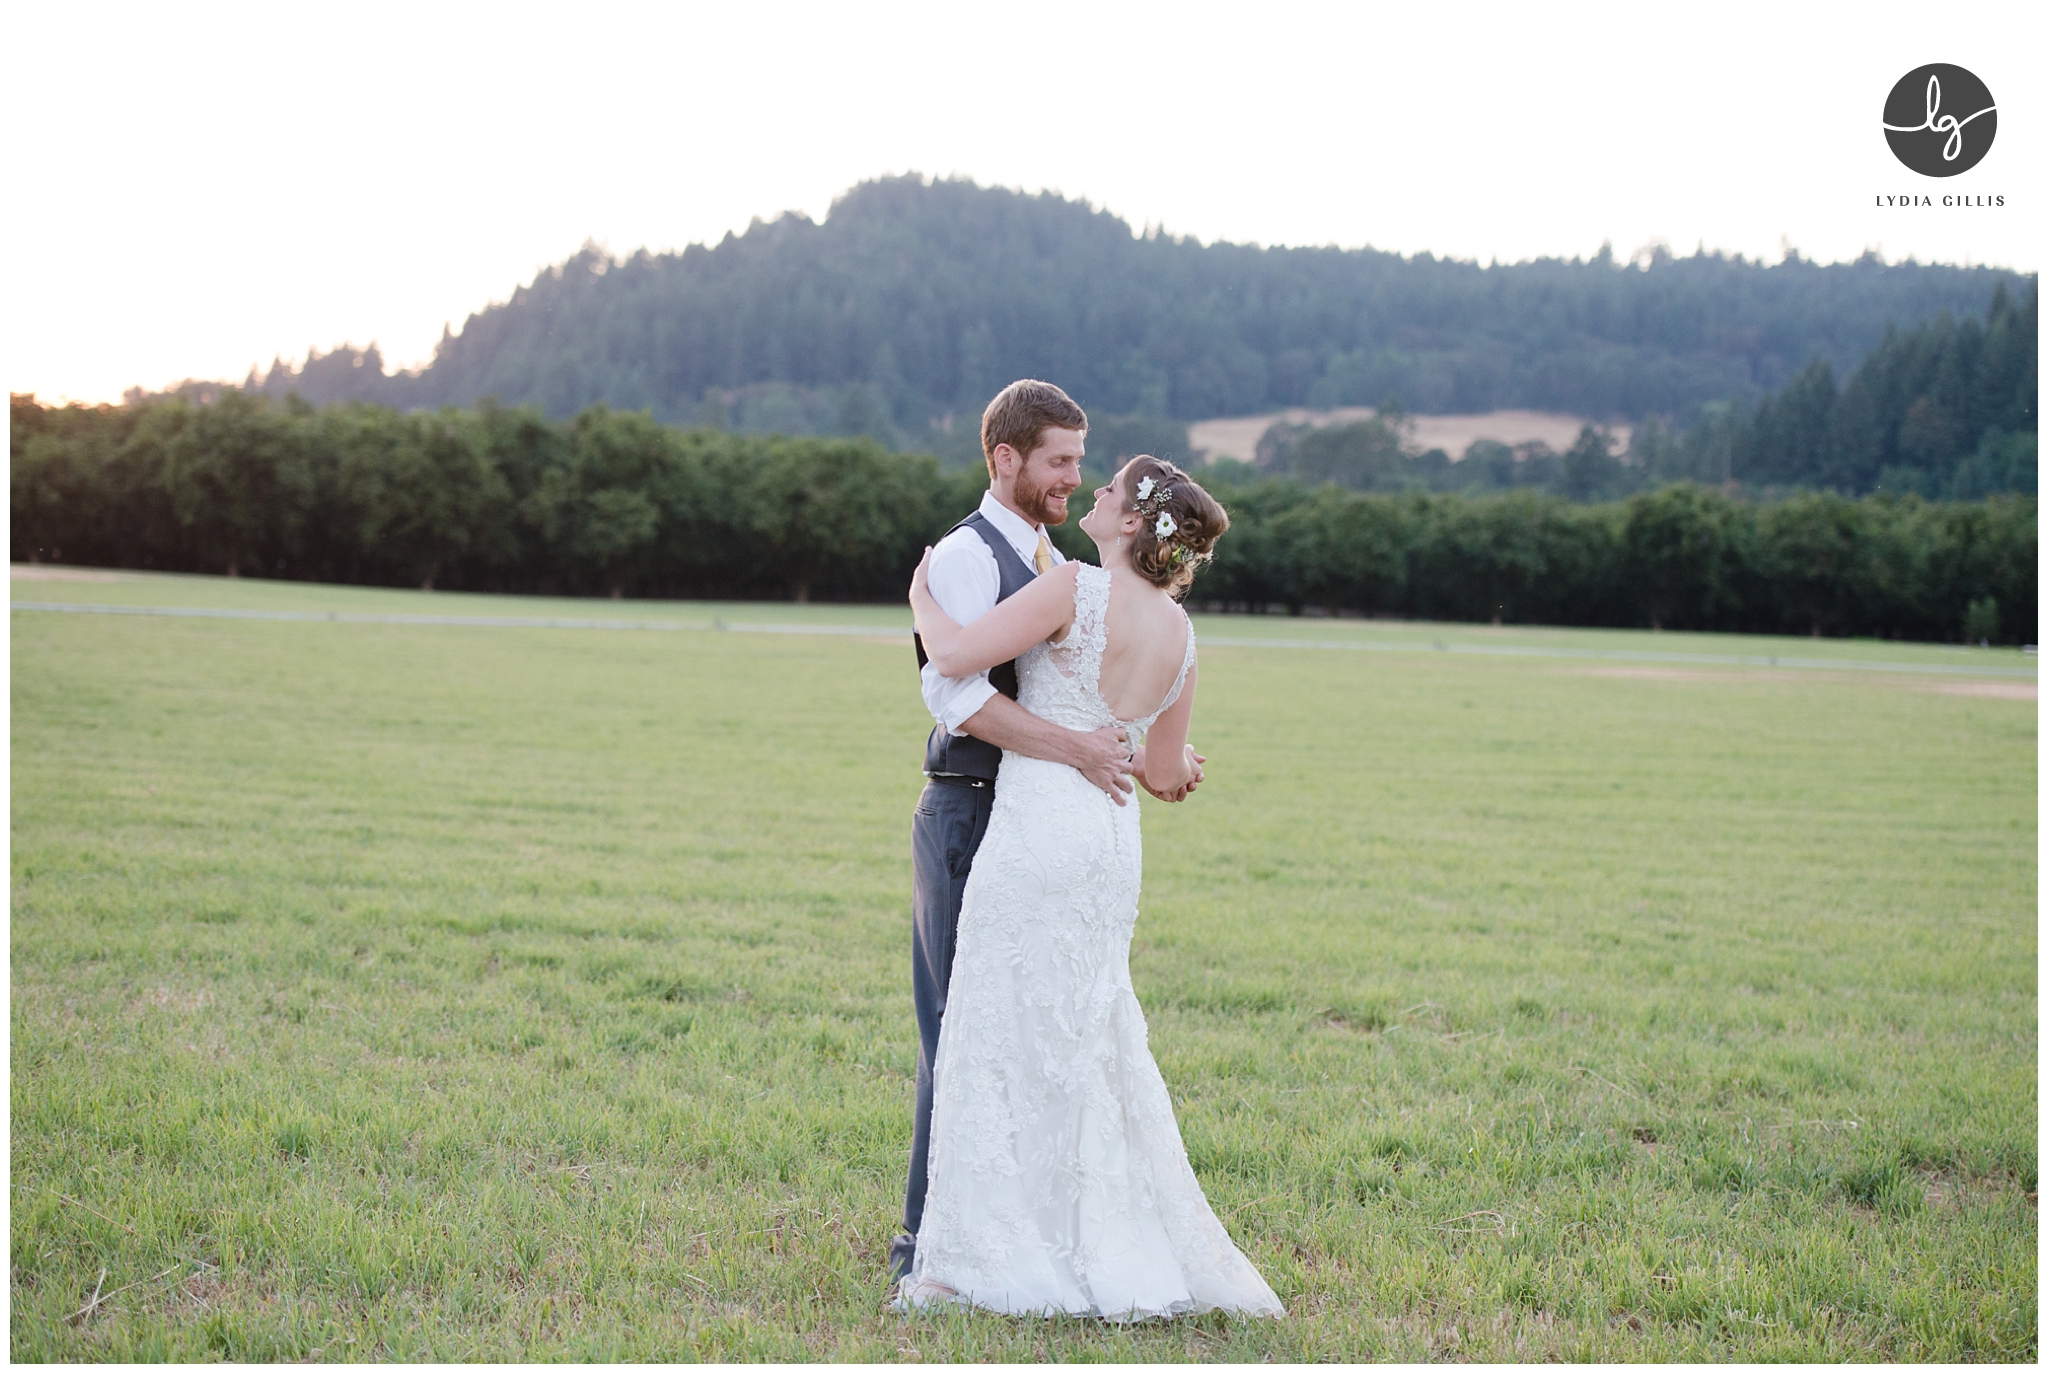 Outdoor wedding picture of bride and groom | Lydia Gillis Photography 